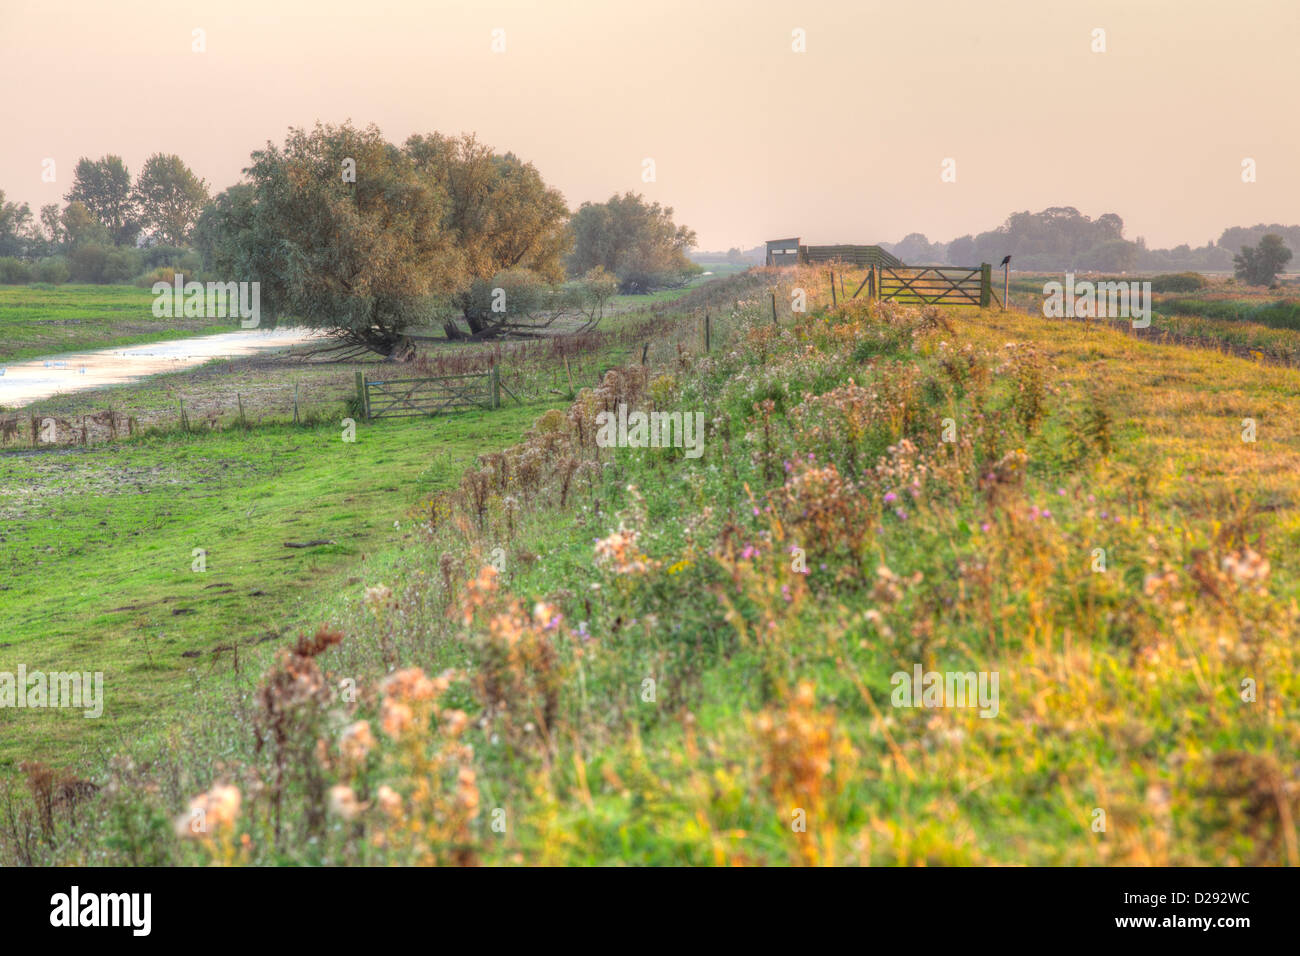 View along flood embankment to a bird-watching hide in evening light. RSPB Ouse Washes. Cambridgeshire, England. Stock Photo